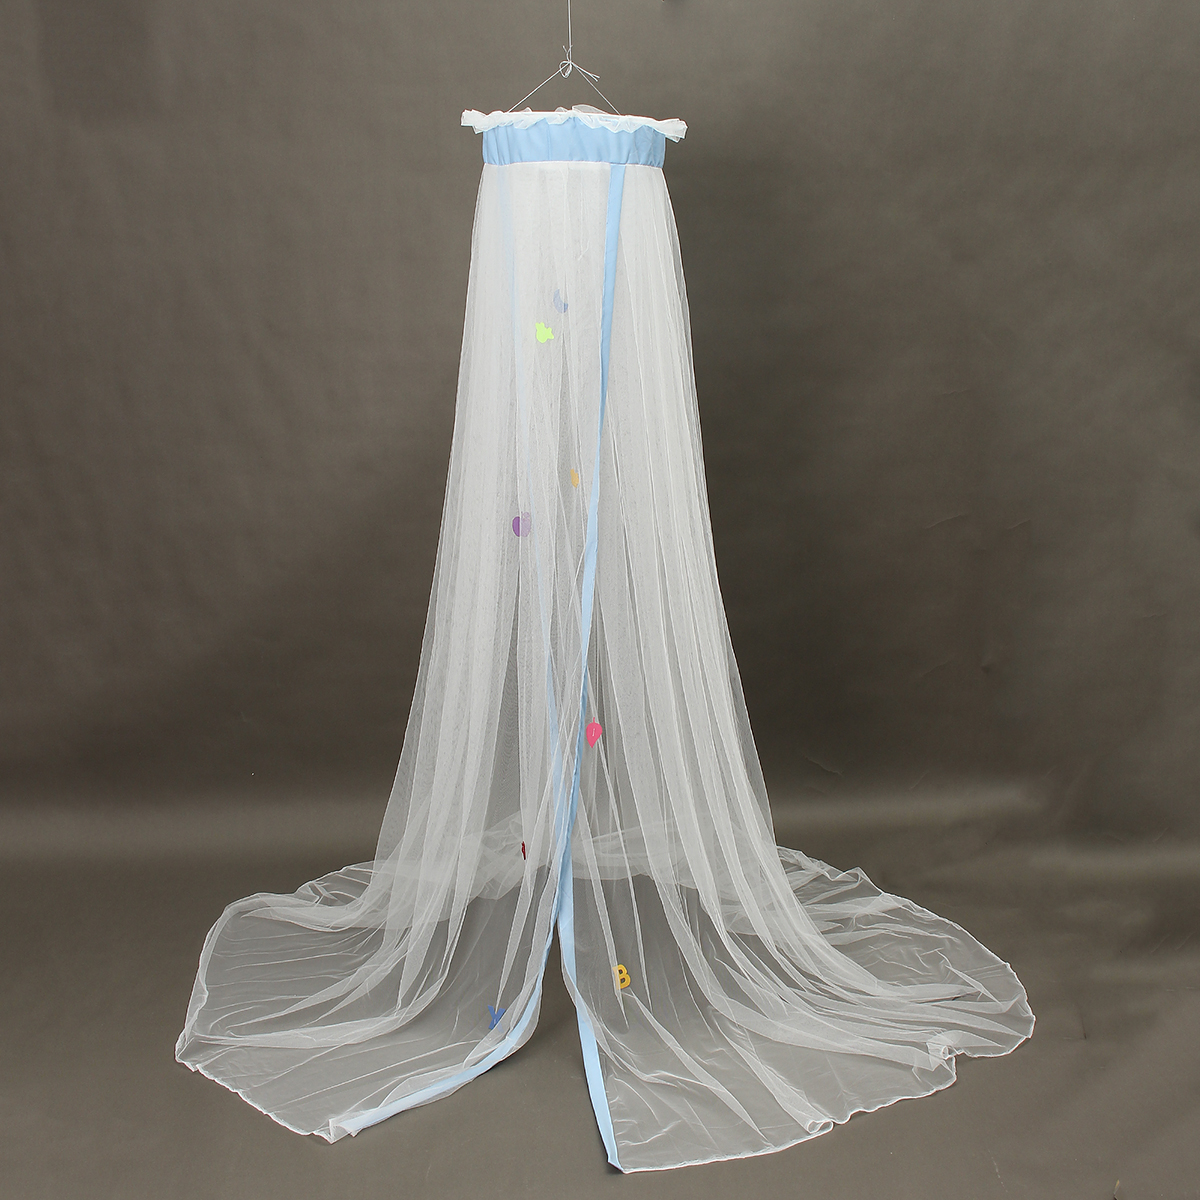 Mosquito-Net-Children-Bed-Curtain-Dome-Cot-Netting-Drape-Stand-Insect-Protection-1818006-5